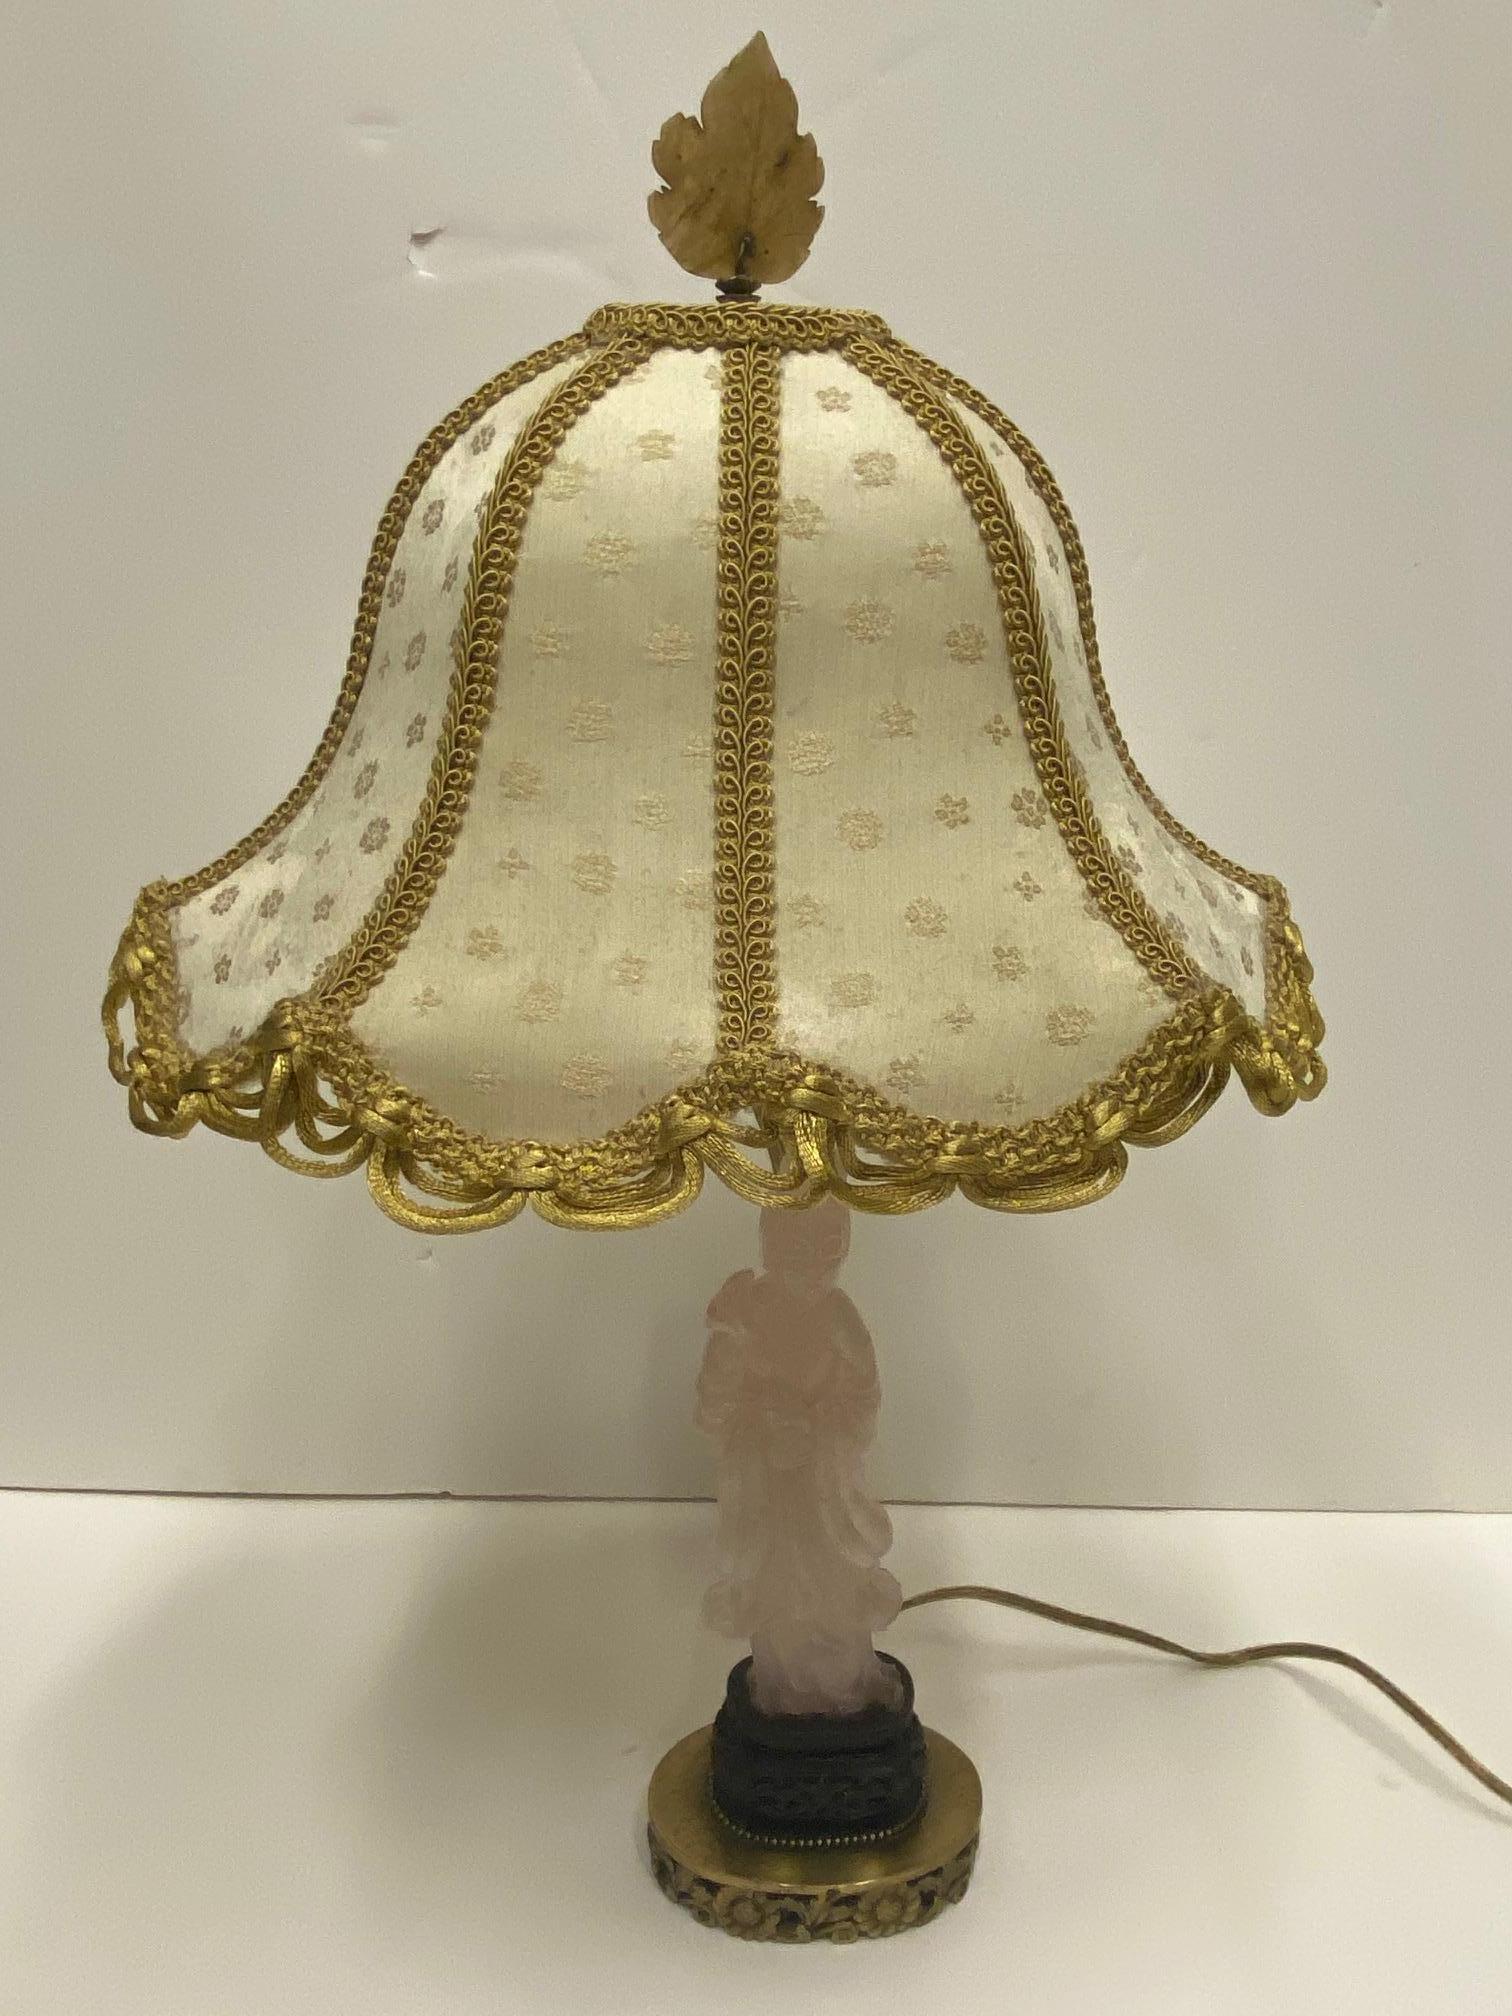 Romantic Chinese figural quartz lamp with lovely custom shade and brass base.
Measures: Lamp itself is 21 H, 4.5 W, 2.5 D.